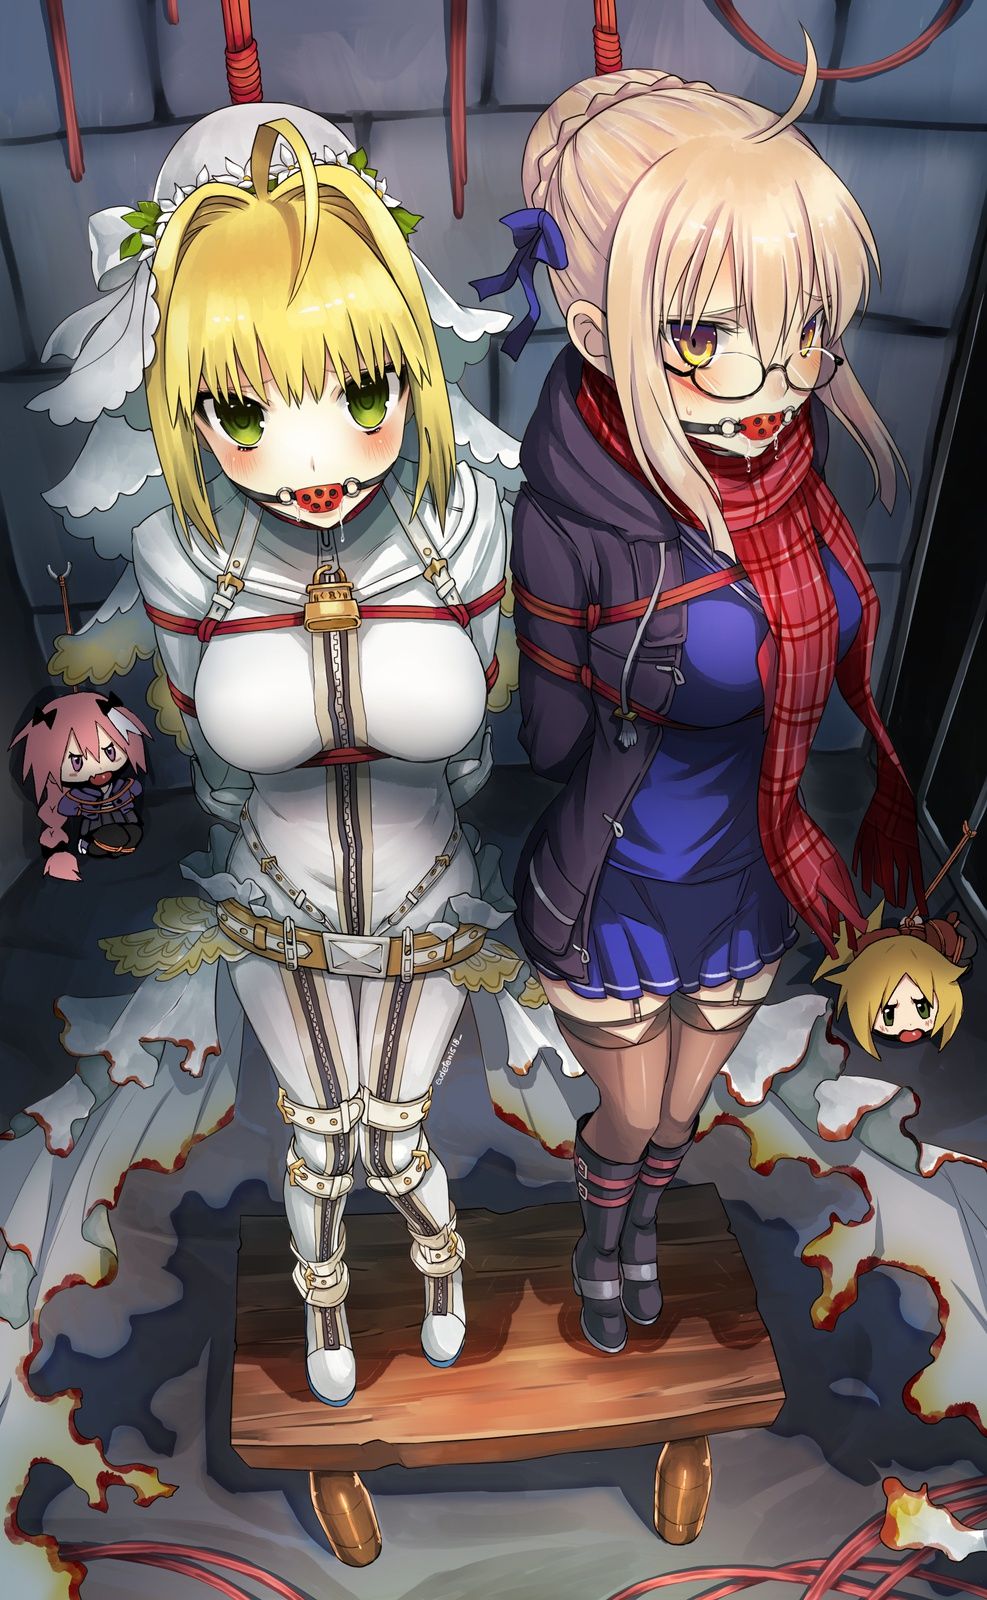 Fate: A do erotic through image that is becoming saber's iki face 18